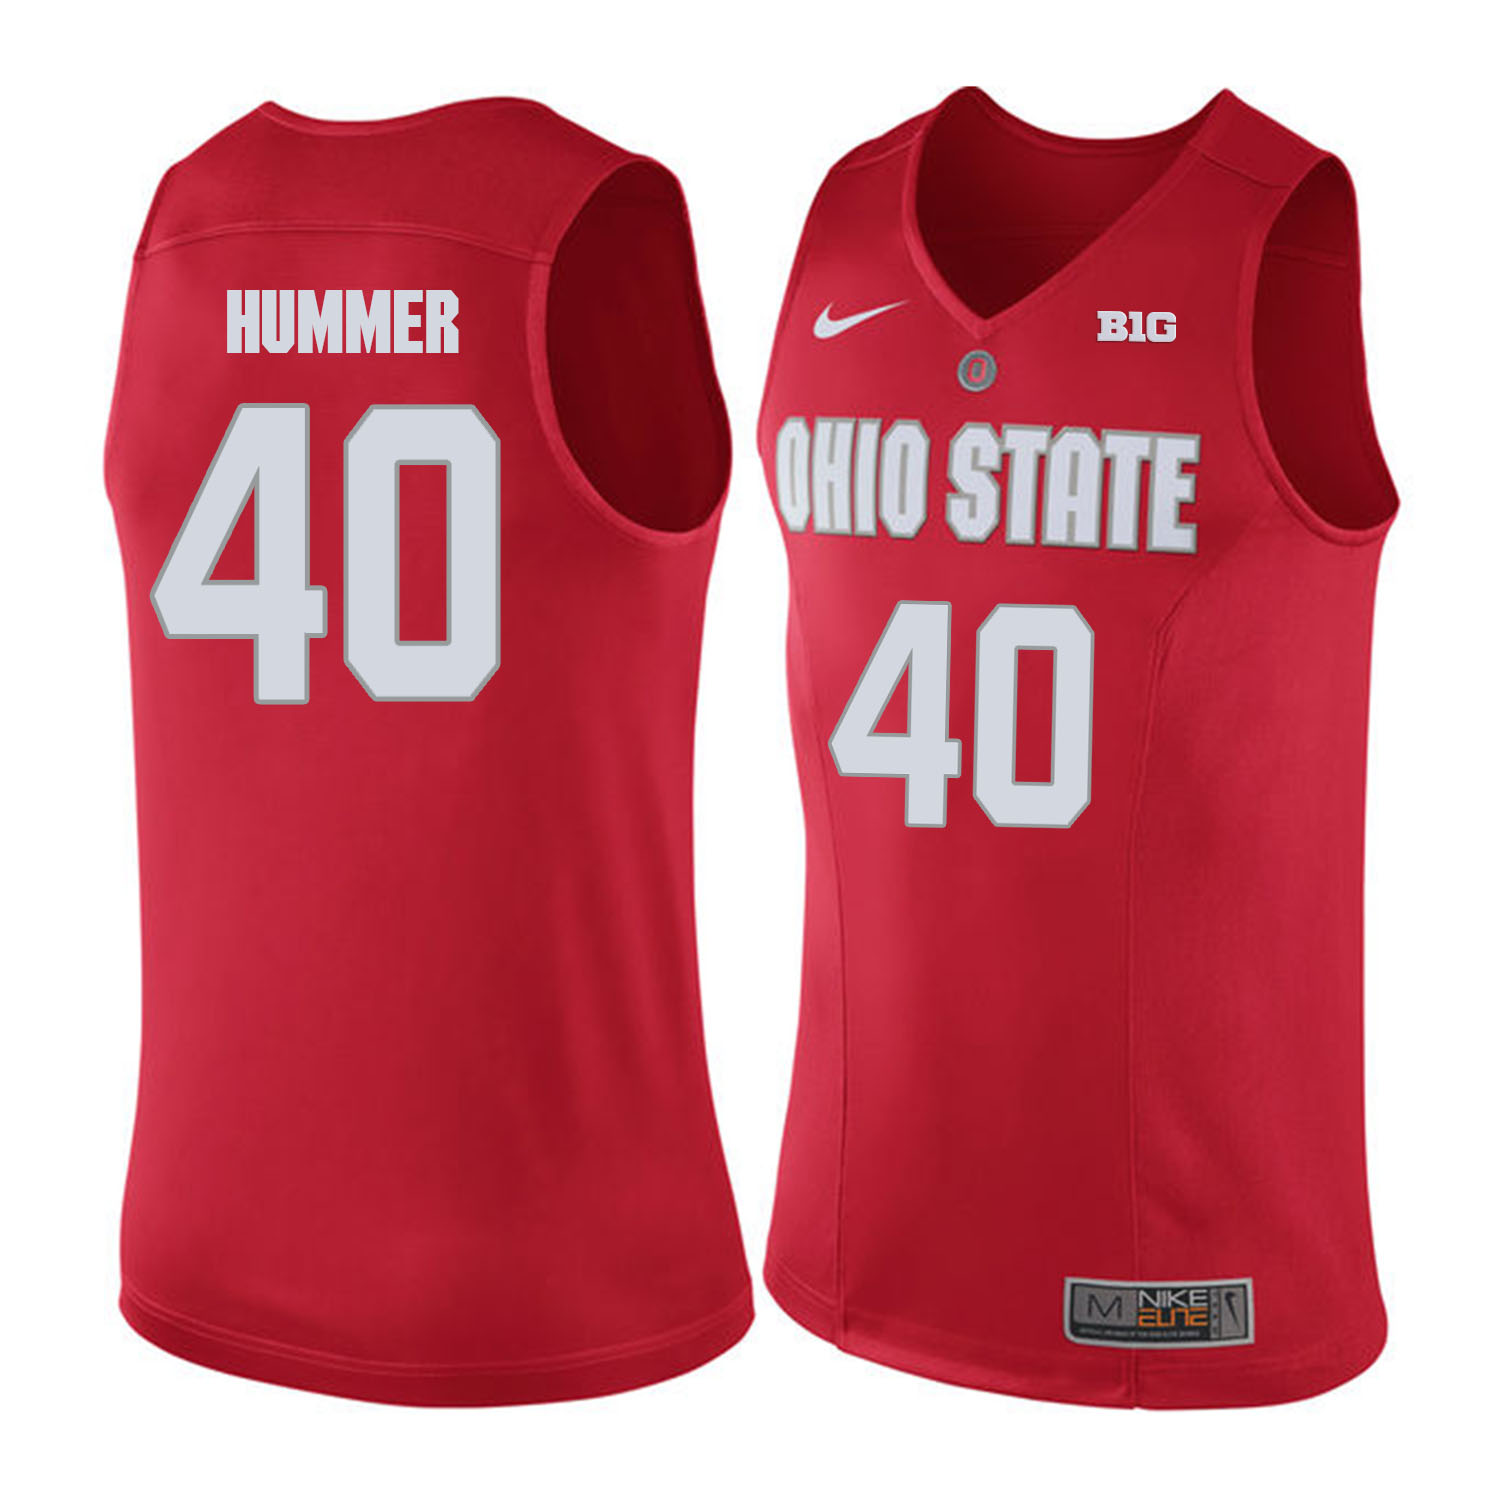 Ohio State Buckeyes 40 Danny Hummer Red College Basketball Jersey